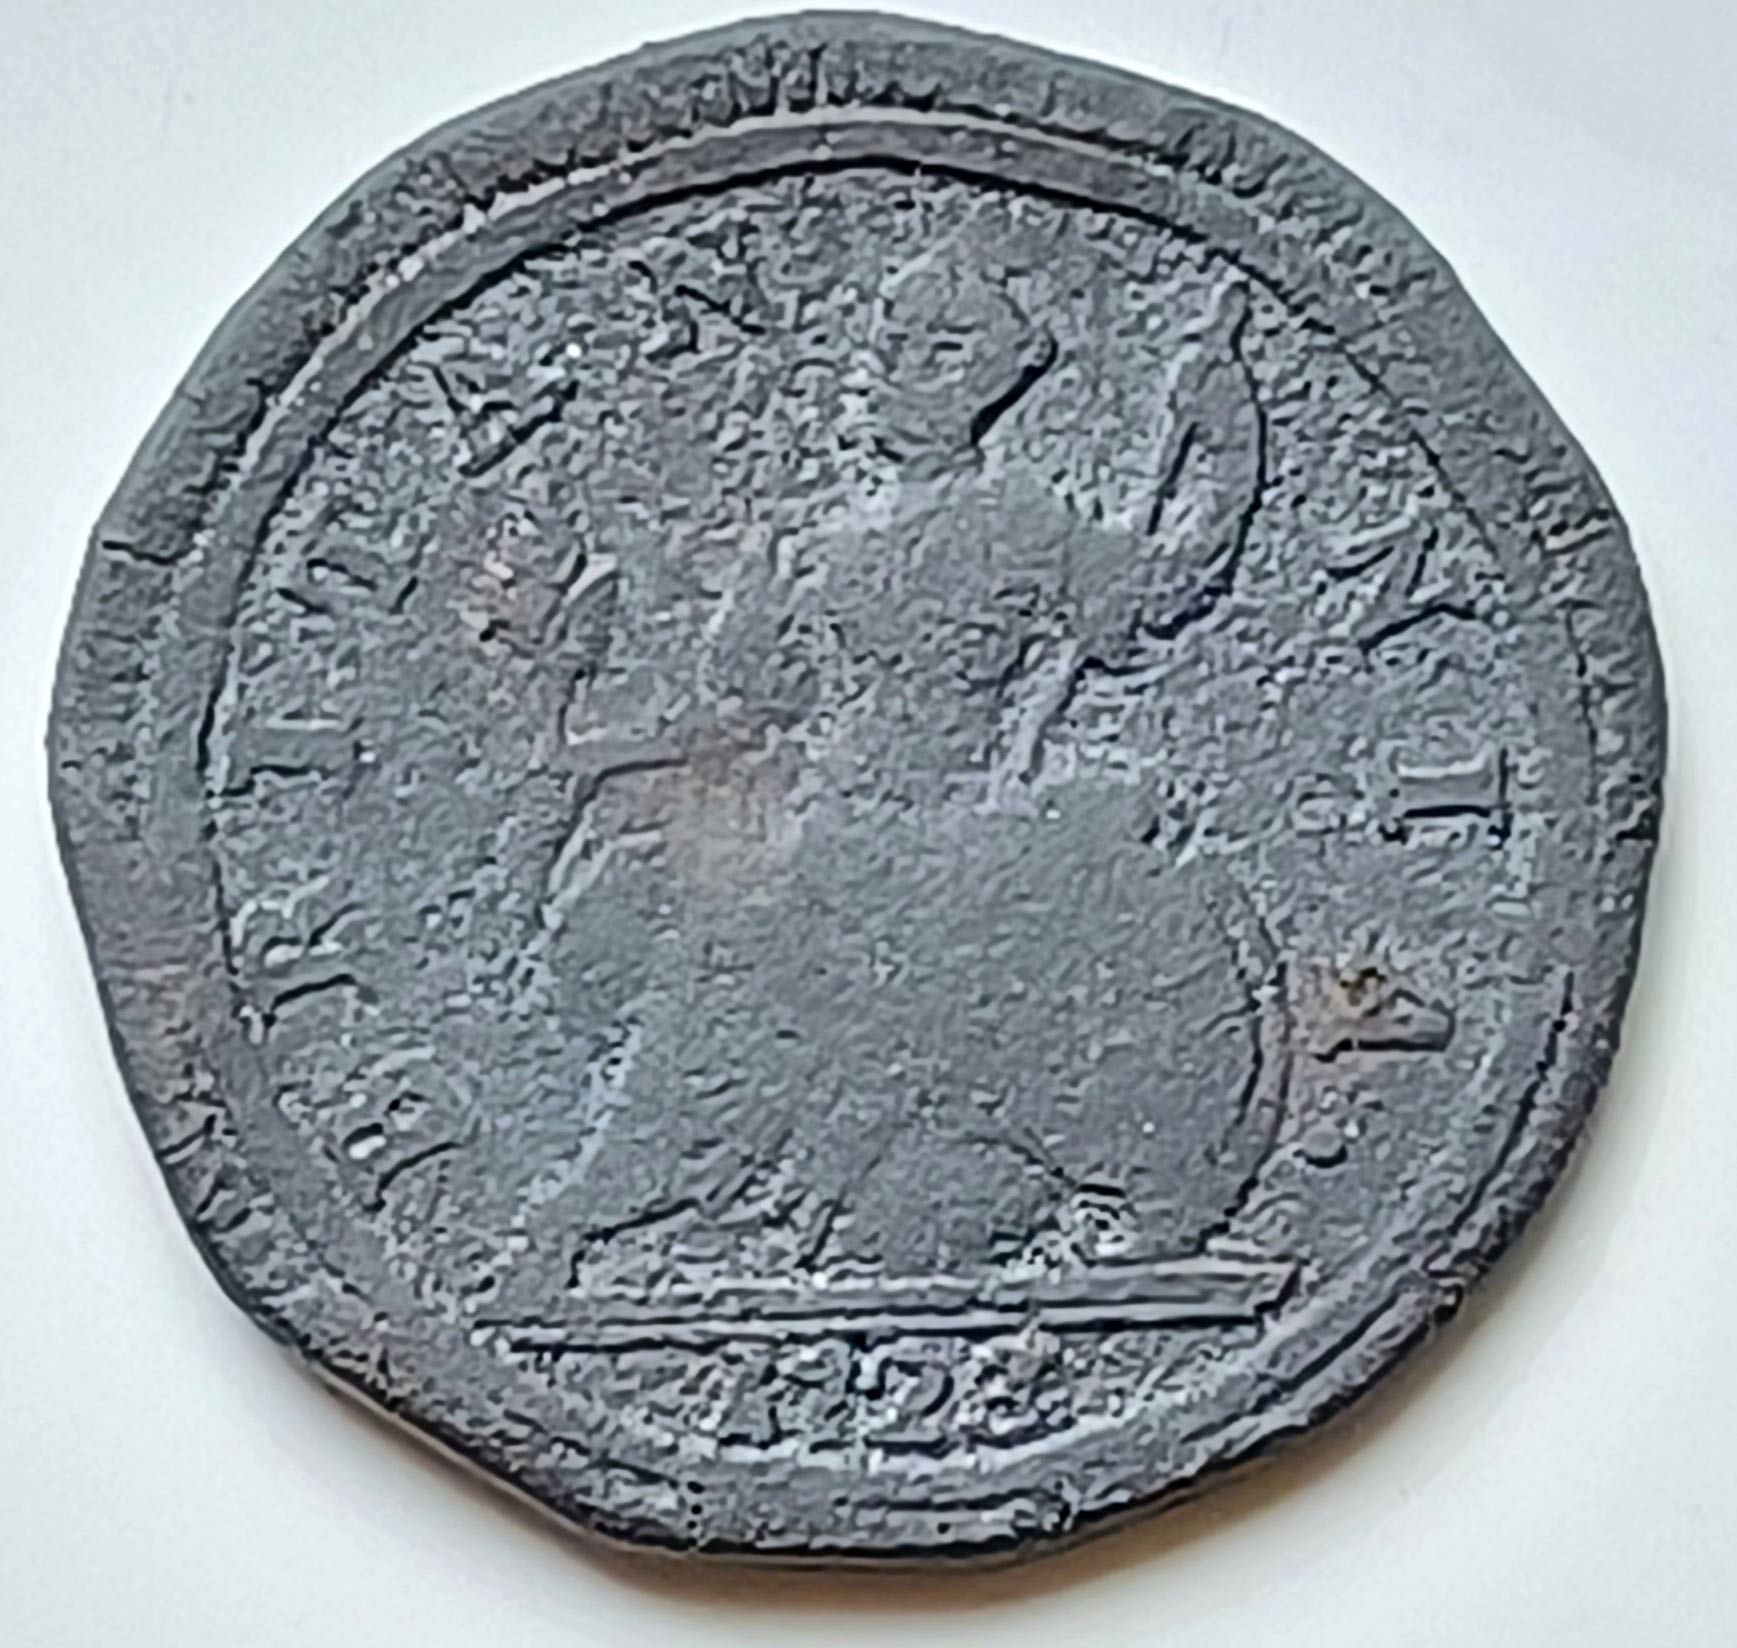 1723 GEORGE I HALF PENNY FROM LENT’S COVE, VERPLANCK, NEW YORK